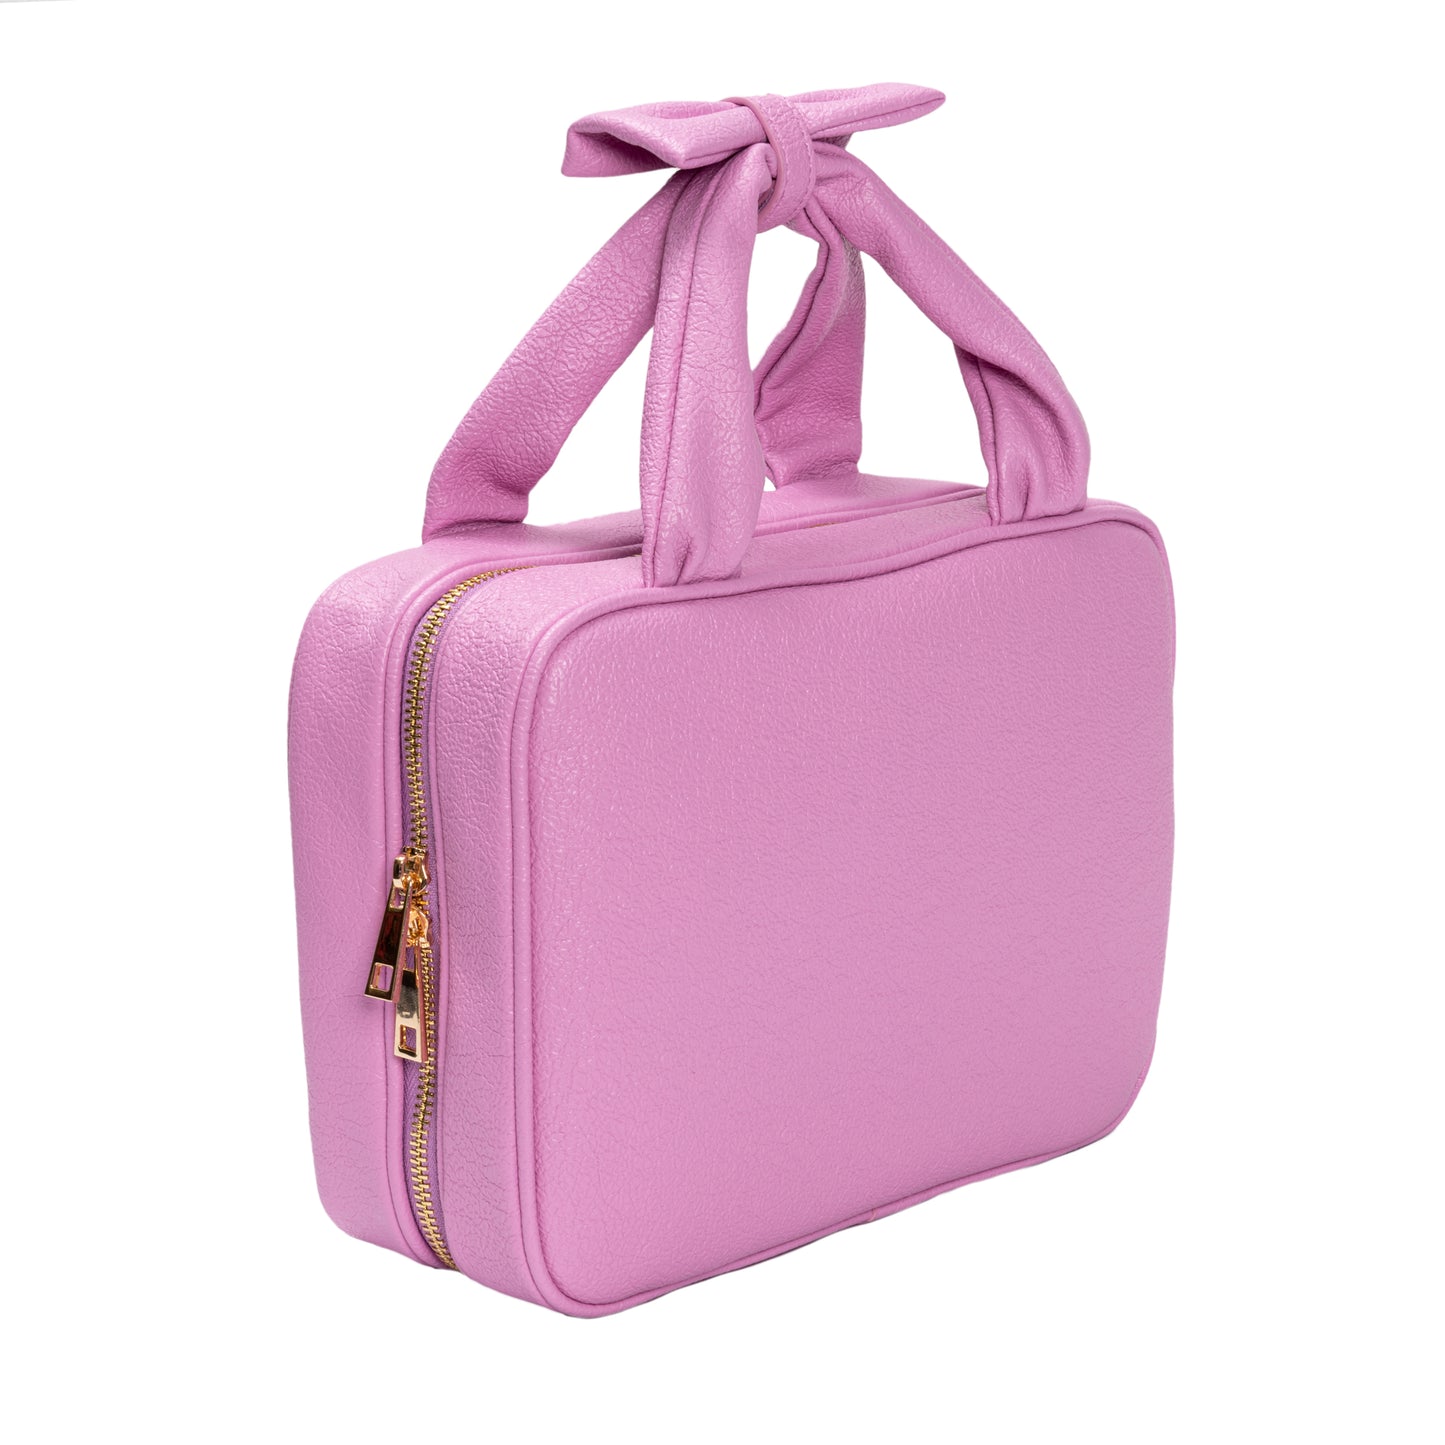 Glam Toiletry Suitcase